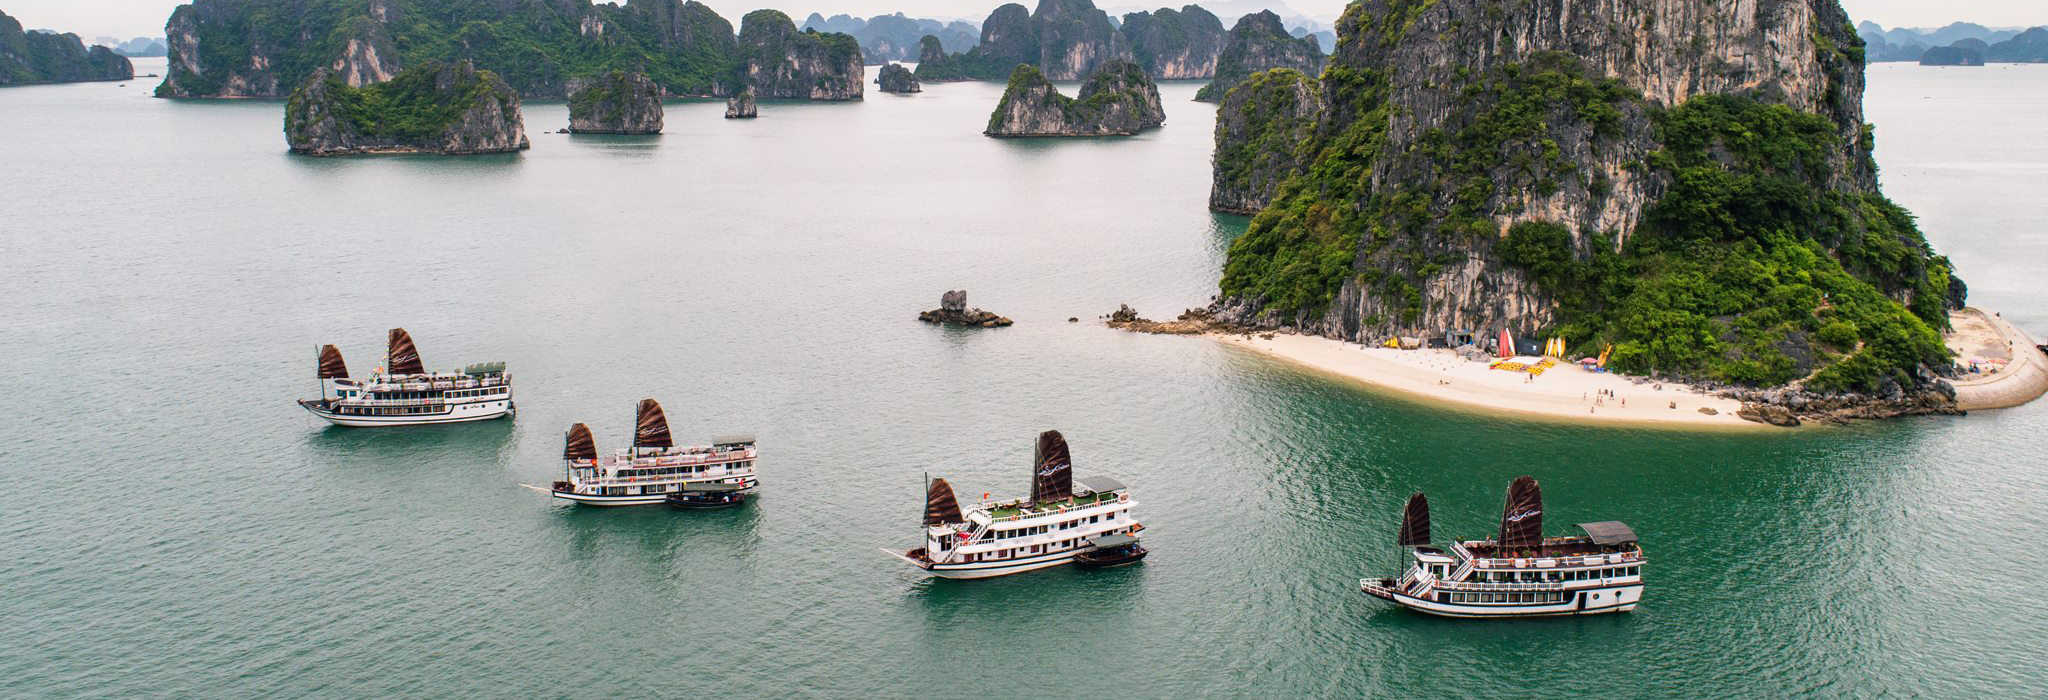 Visiting Halong Bay in January - What You Should Know